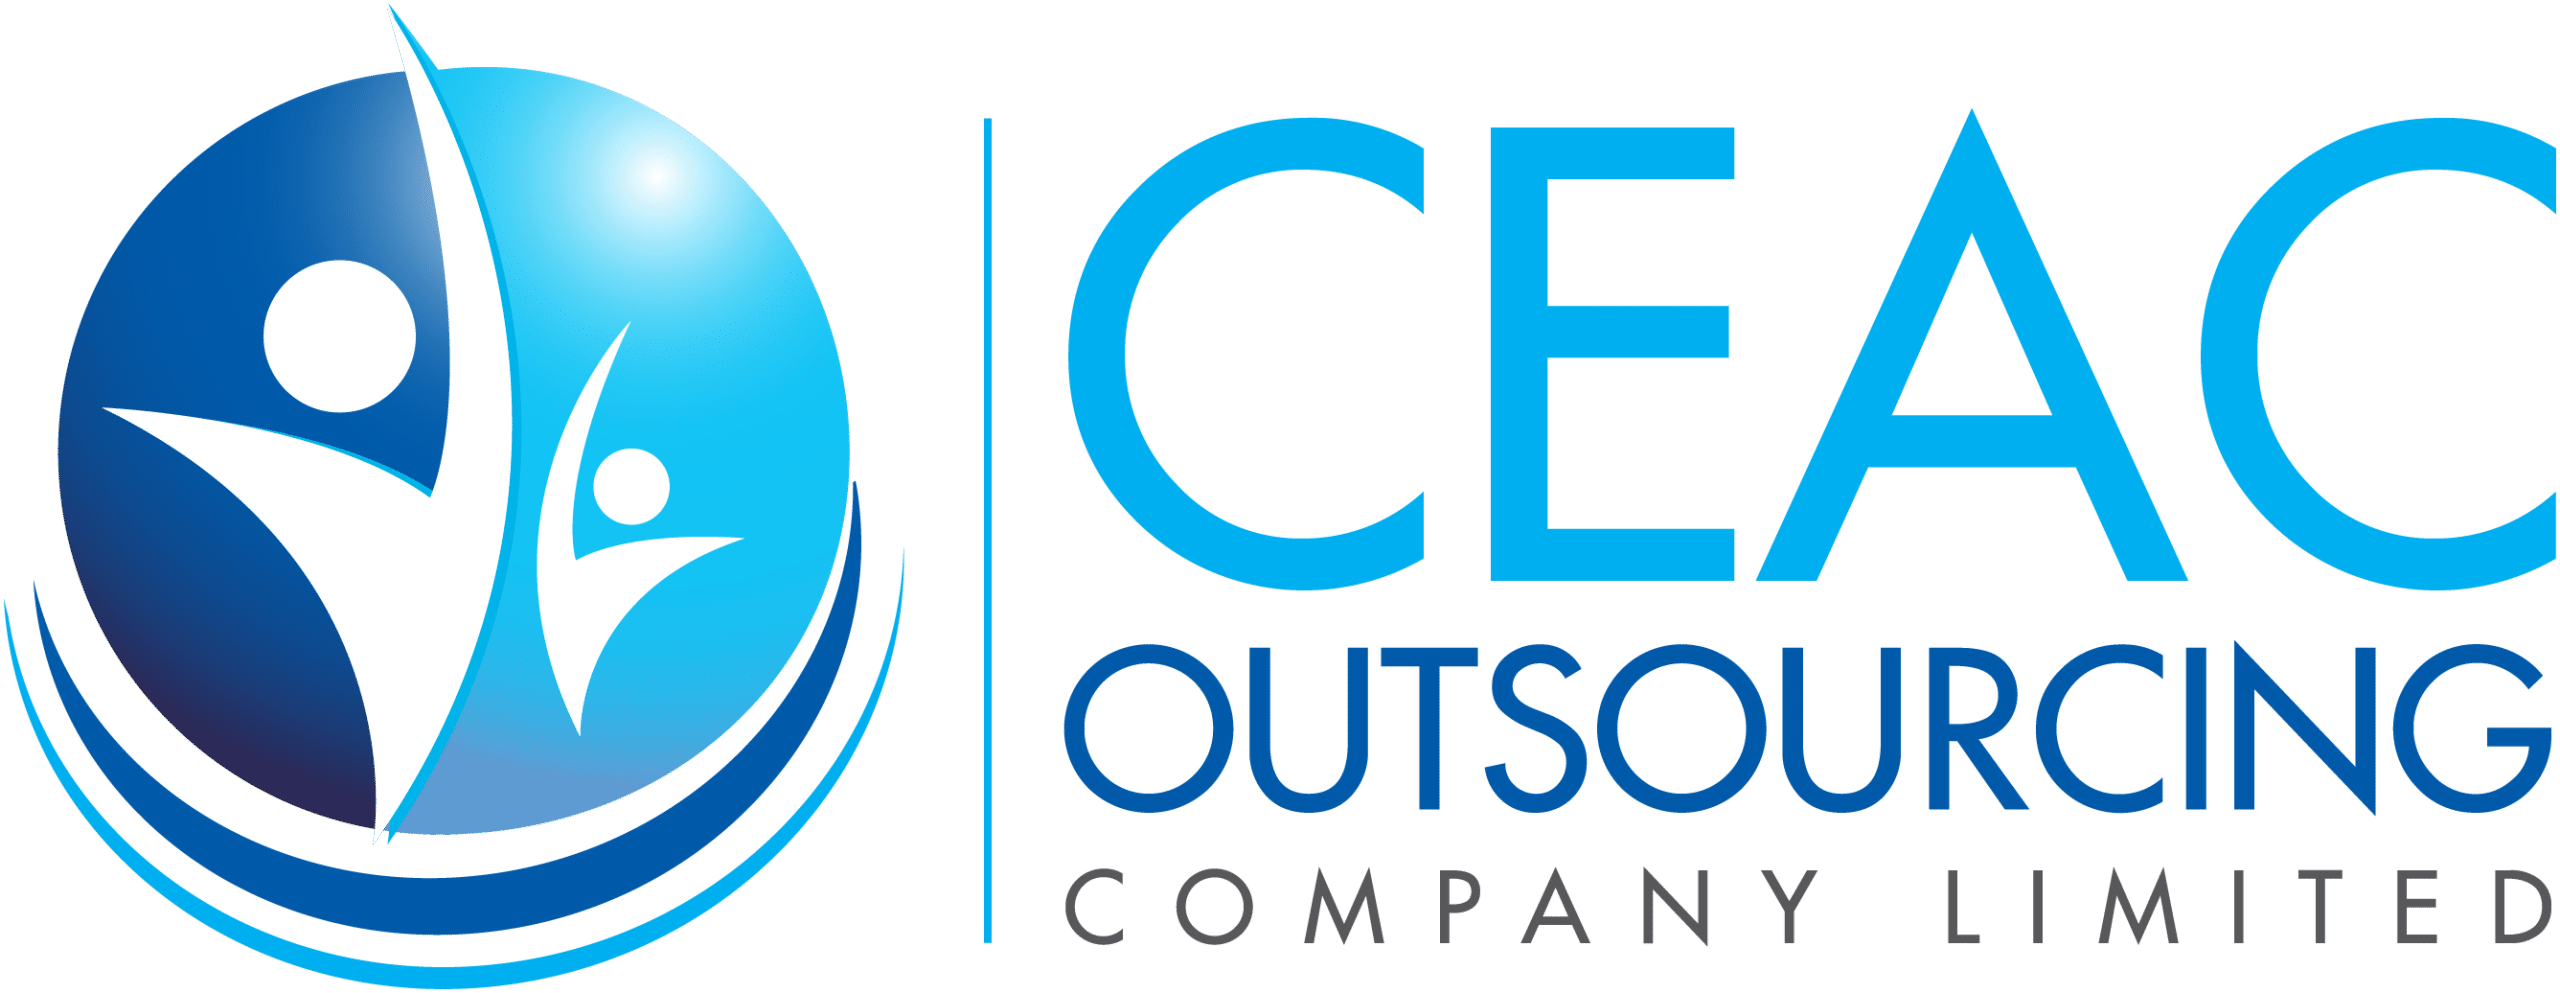 CEAC Outsourcing Company Limited – Human resource consulting in Kingston